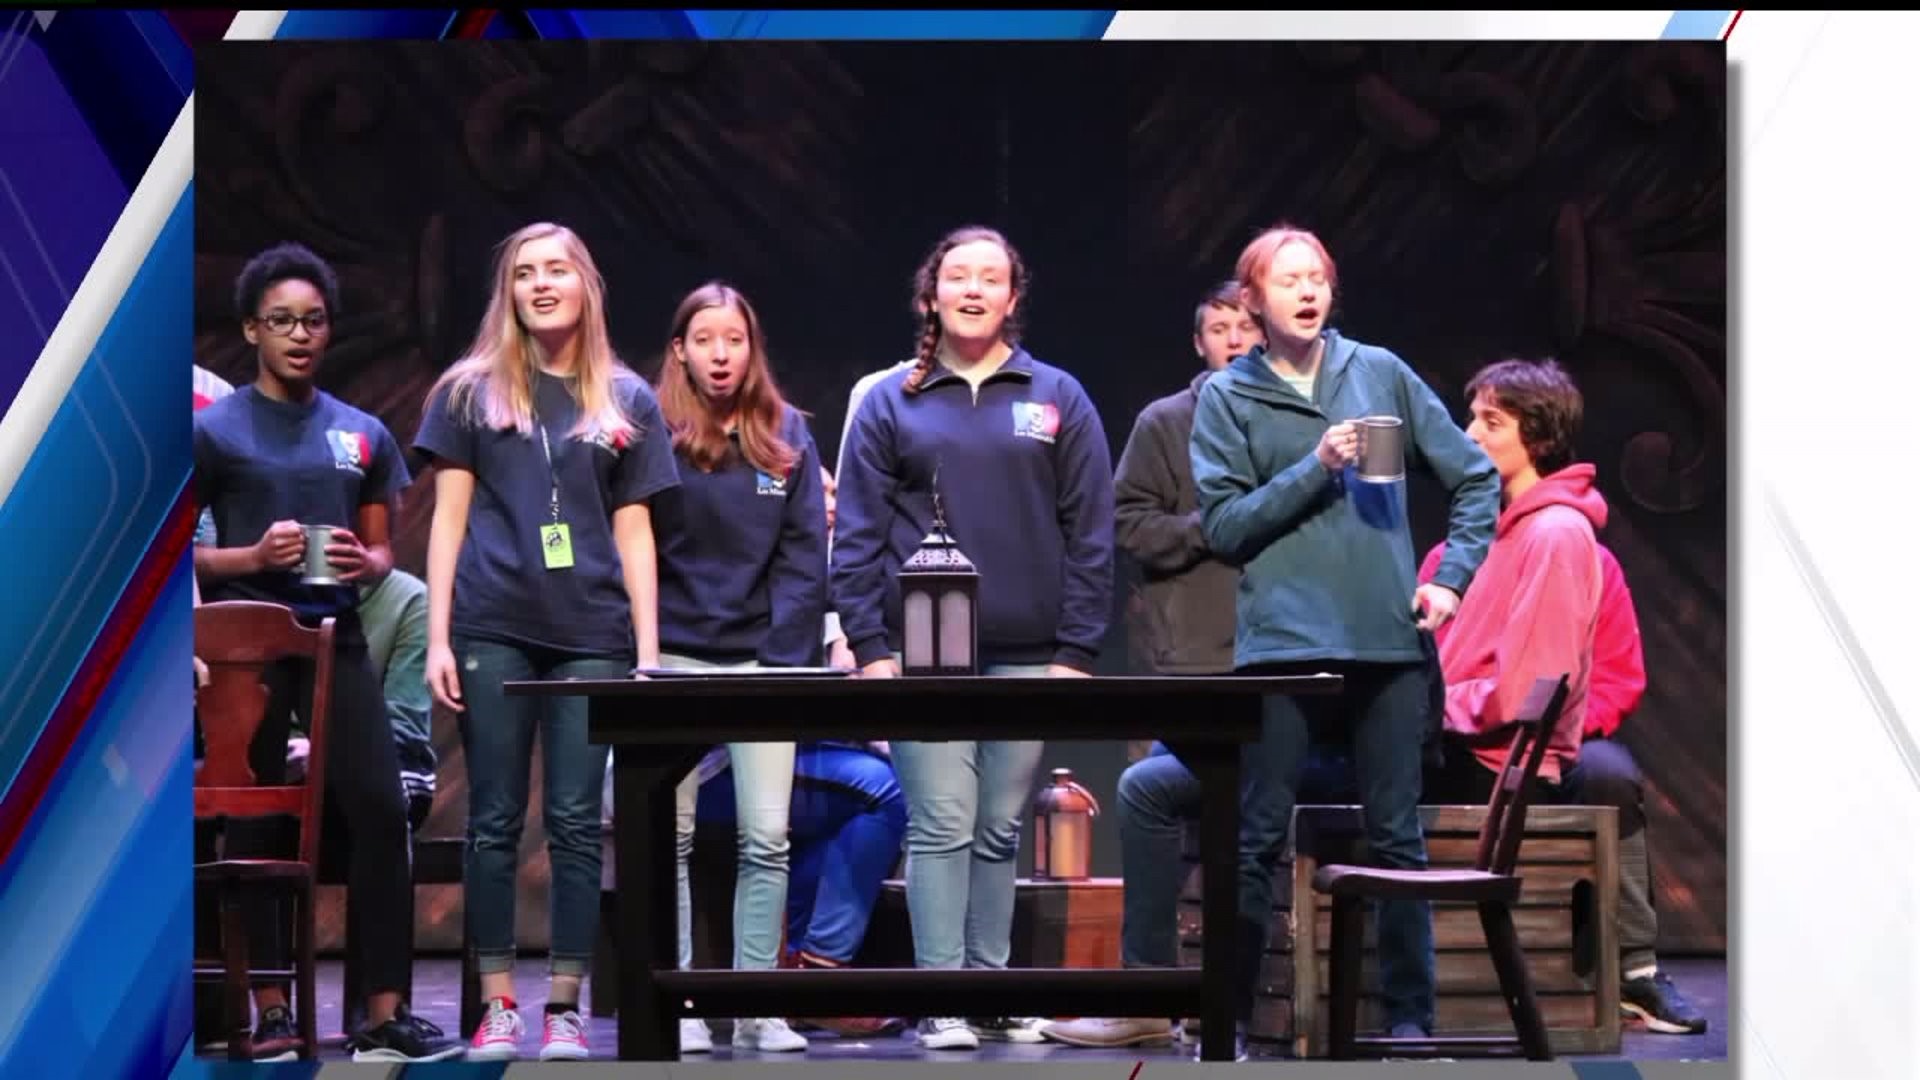 Dallastown Area High School to put on production of "Les Mis"